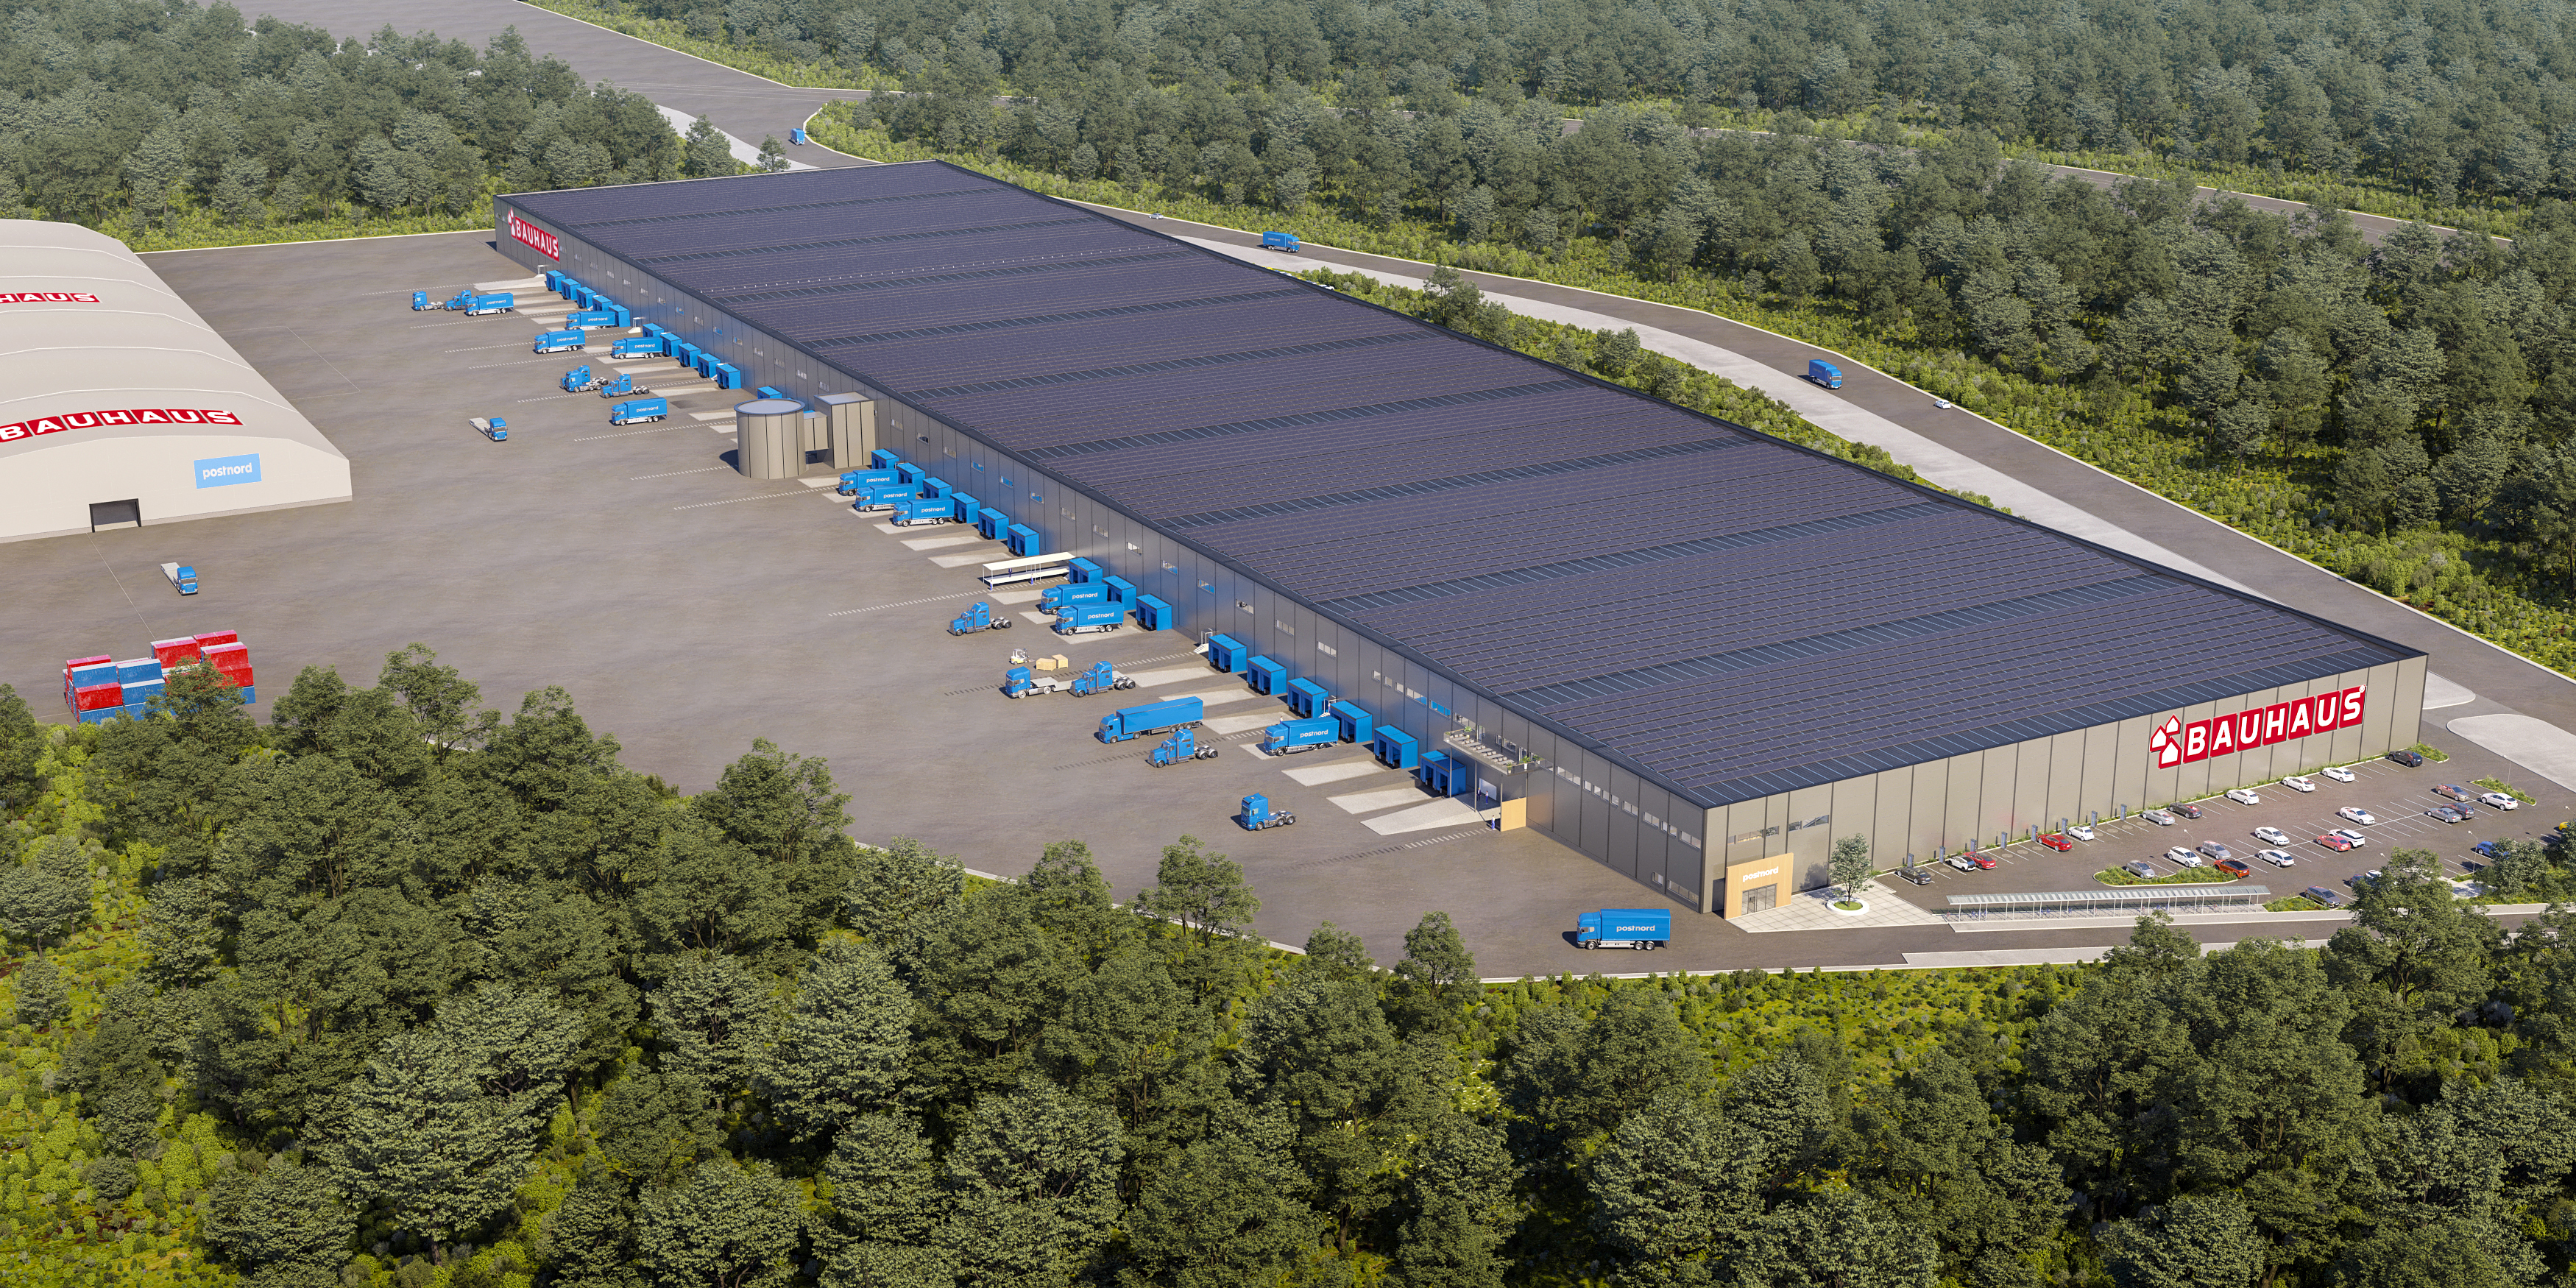 Soltech will build the Nordic region's largest solar cell facility on a roof